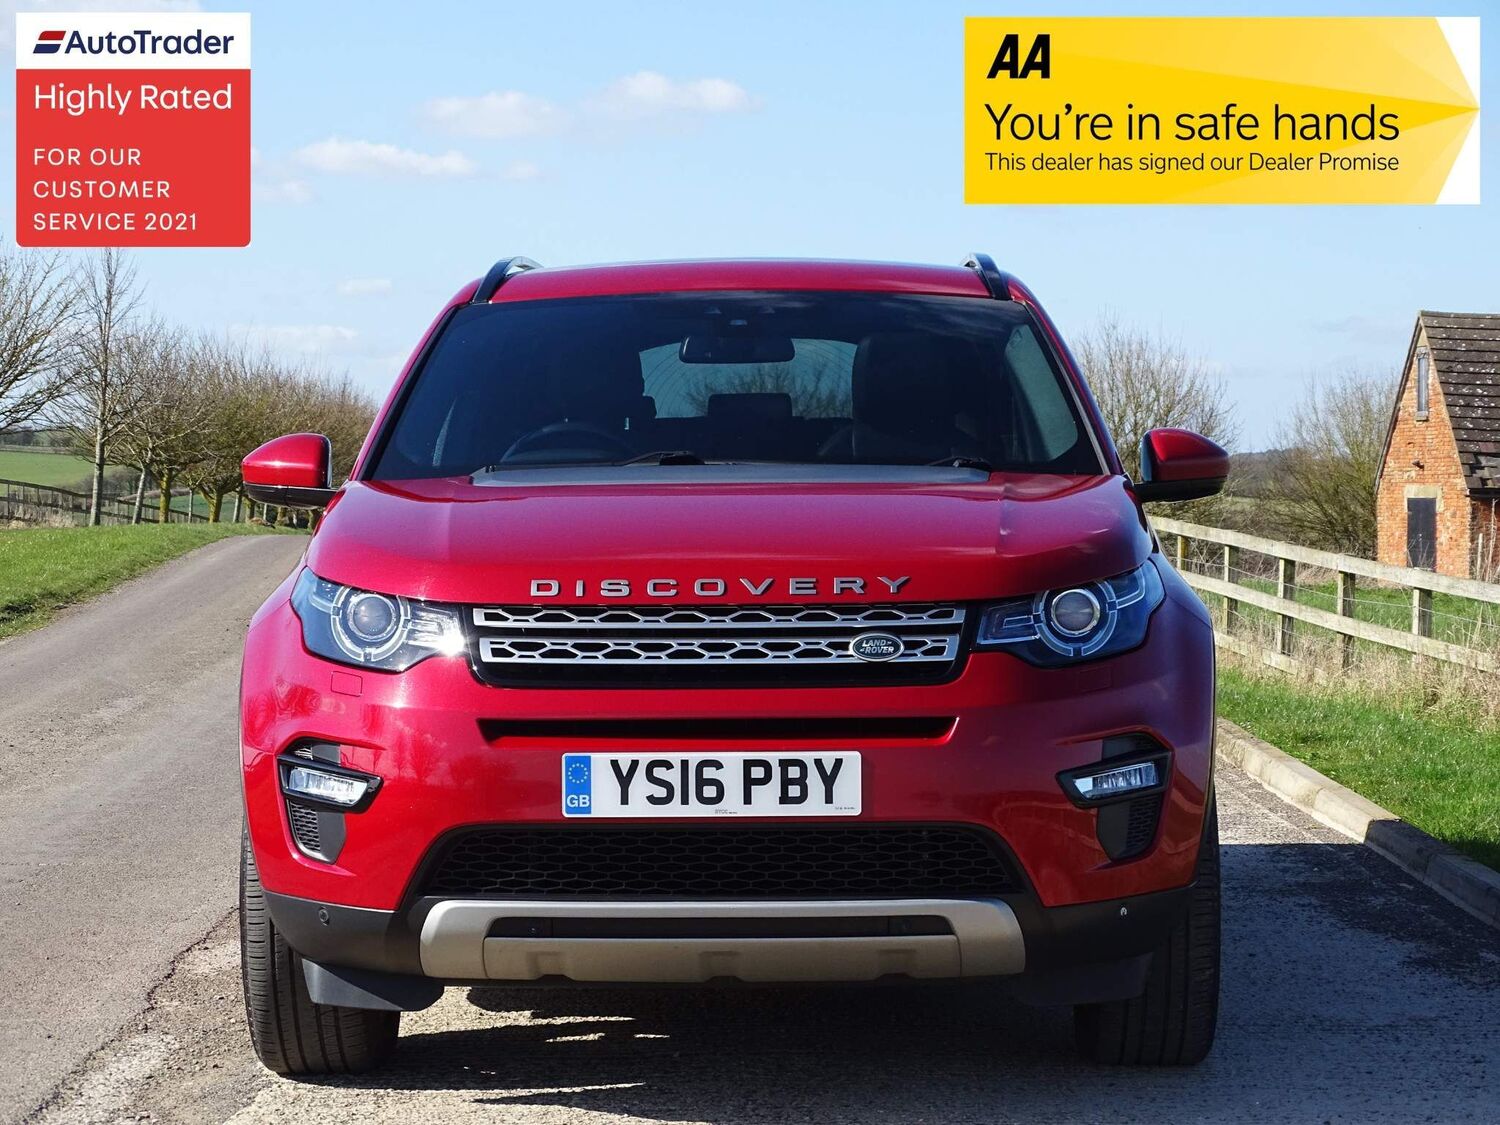 Used LAND ROVER DISCOVERY SPORT in Thame, Buckinghamshire | Carnatics Motor  Company Limited